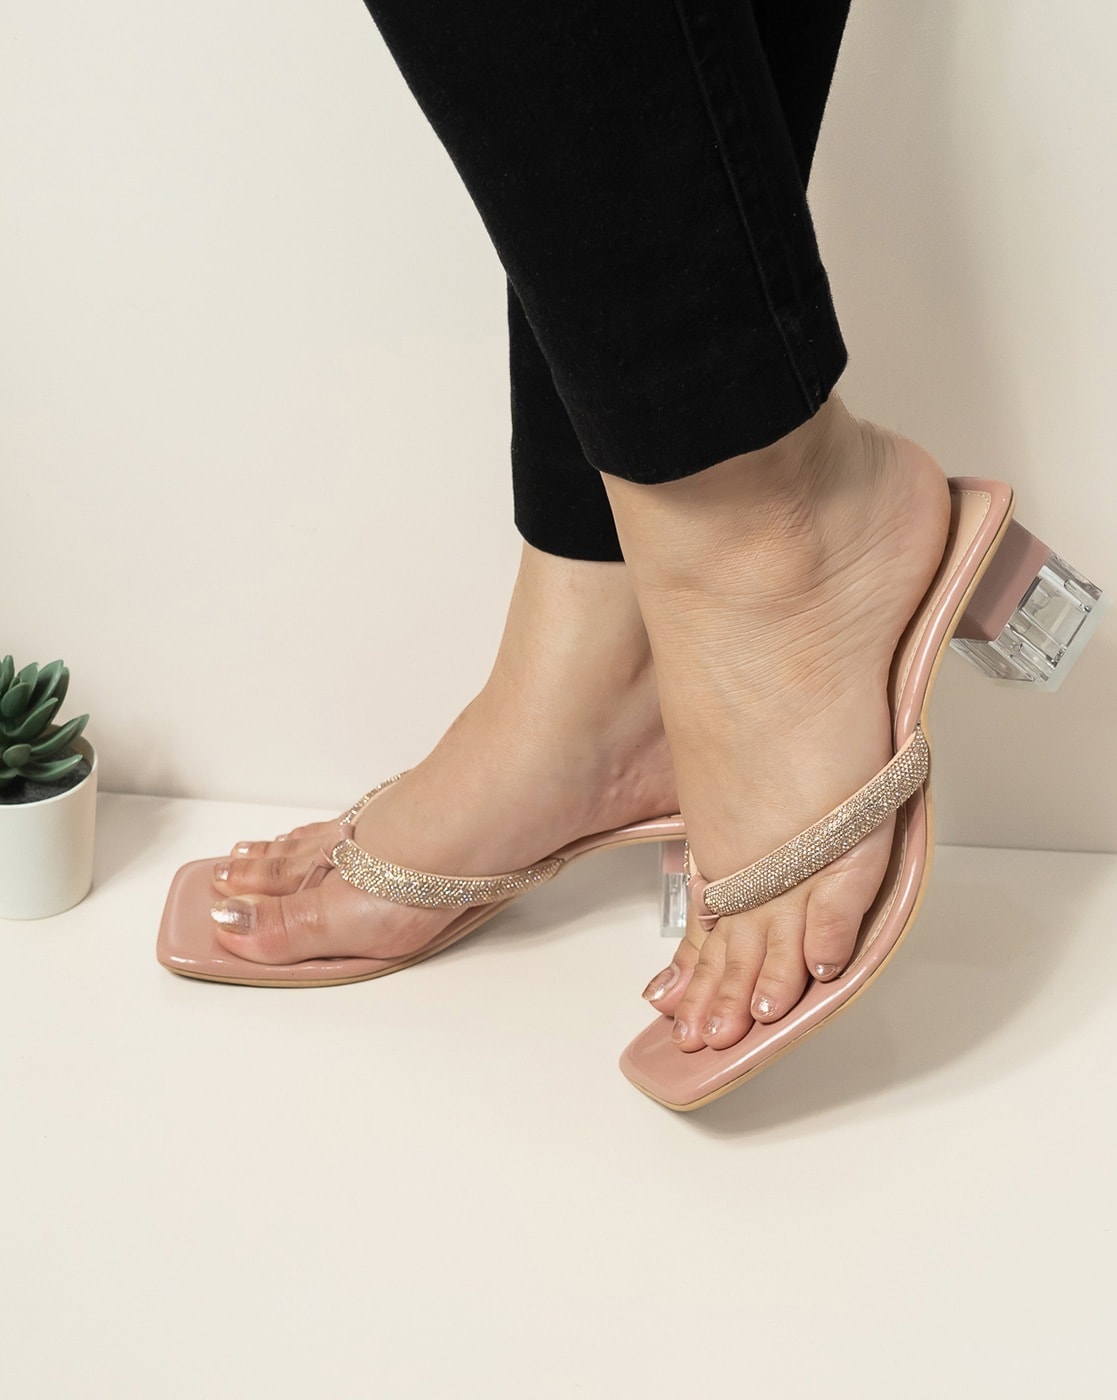 Nude Toe Thong Clear Strap Ankle Tie Wedges